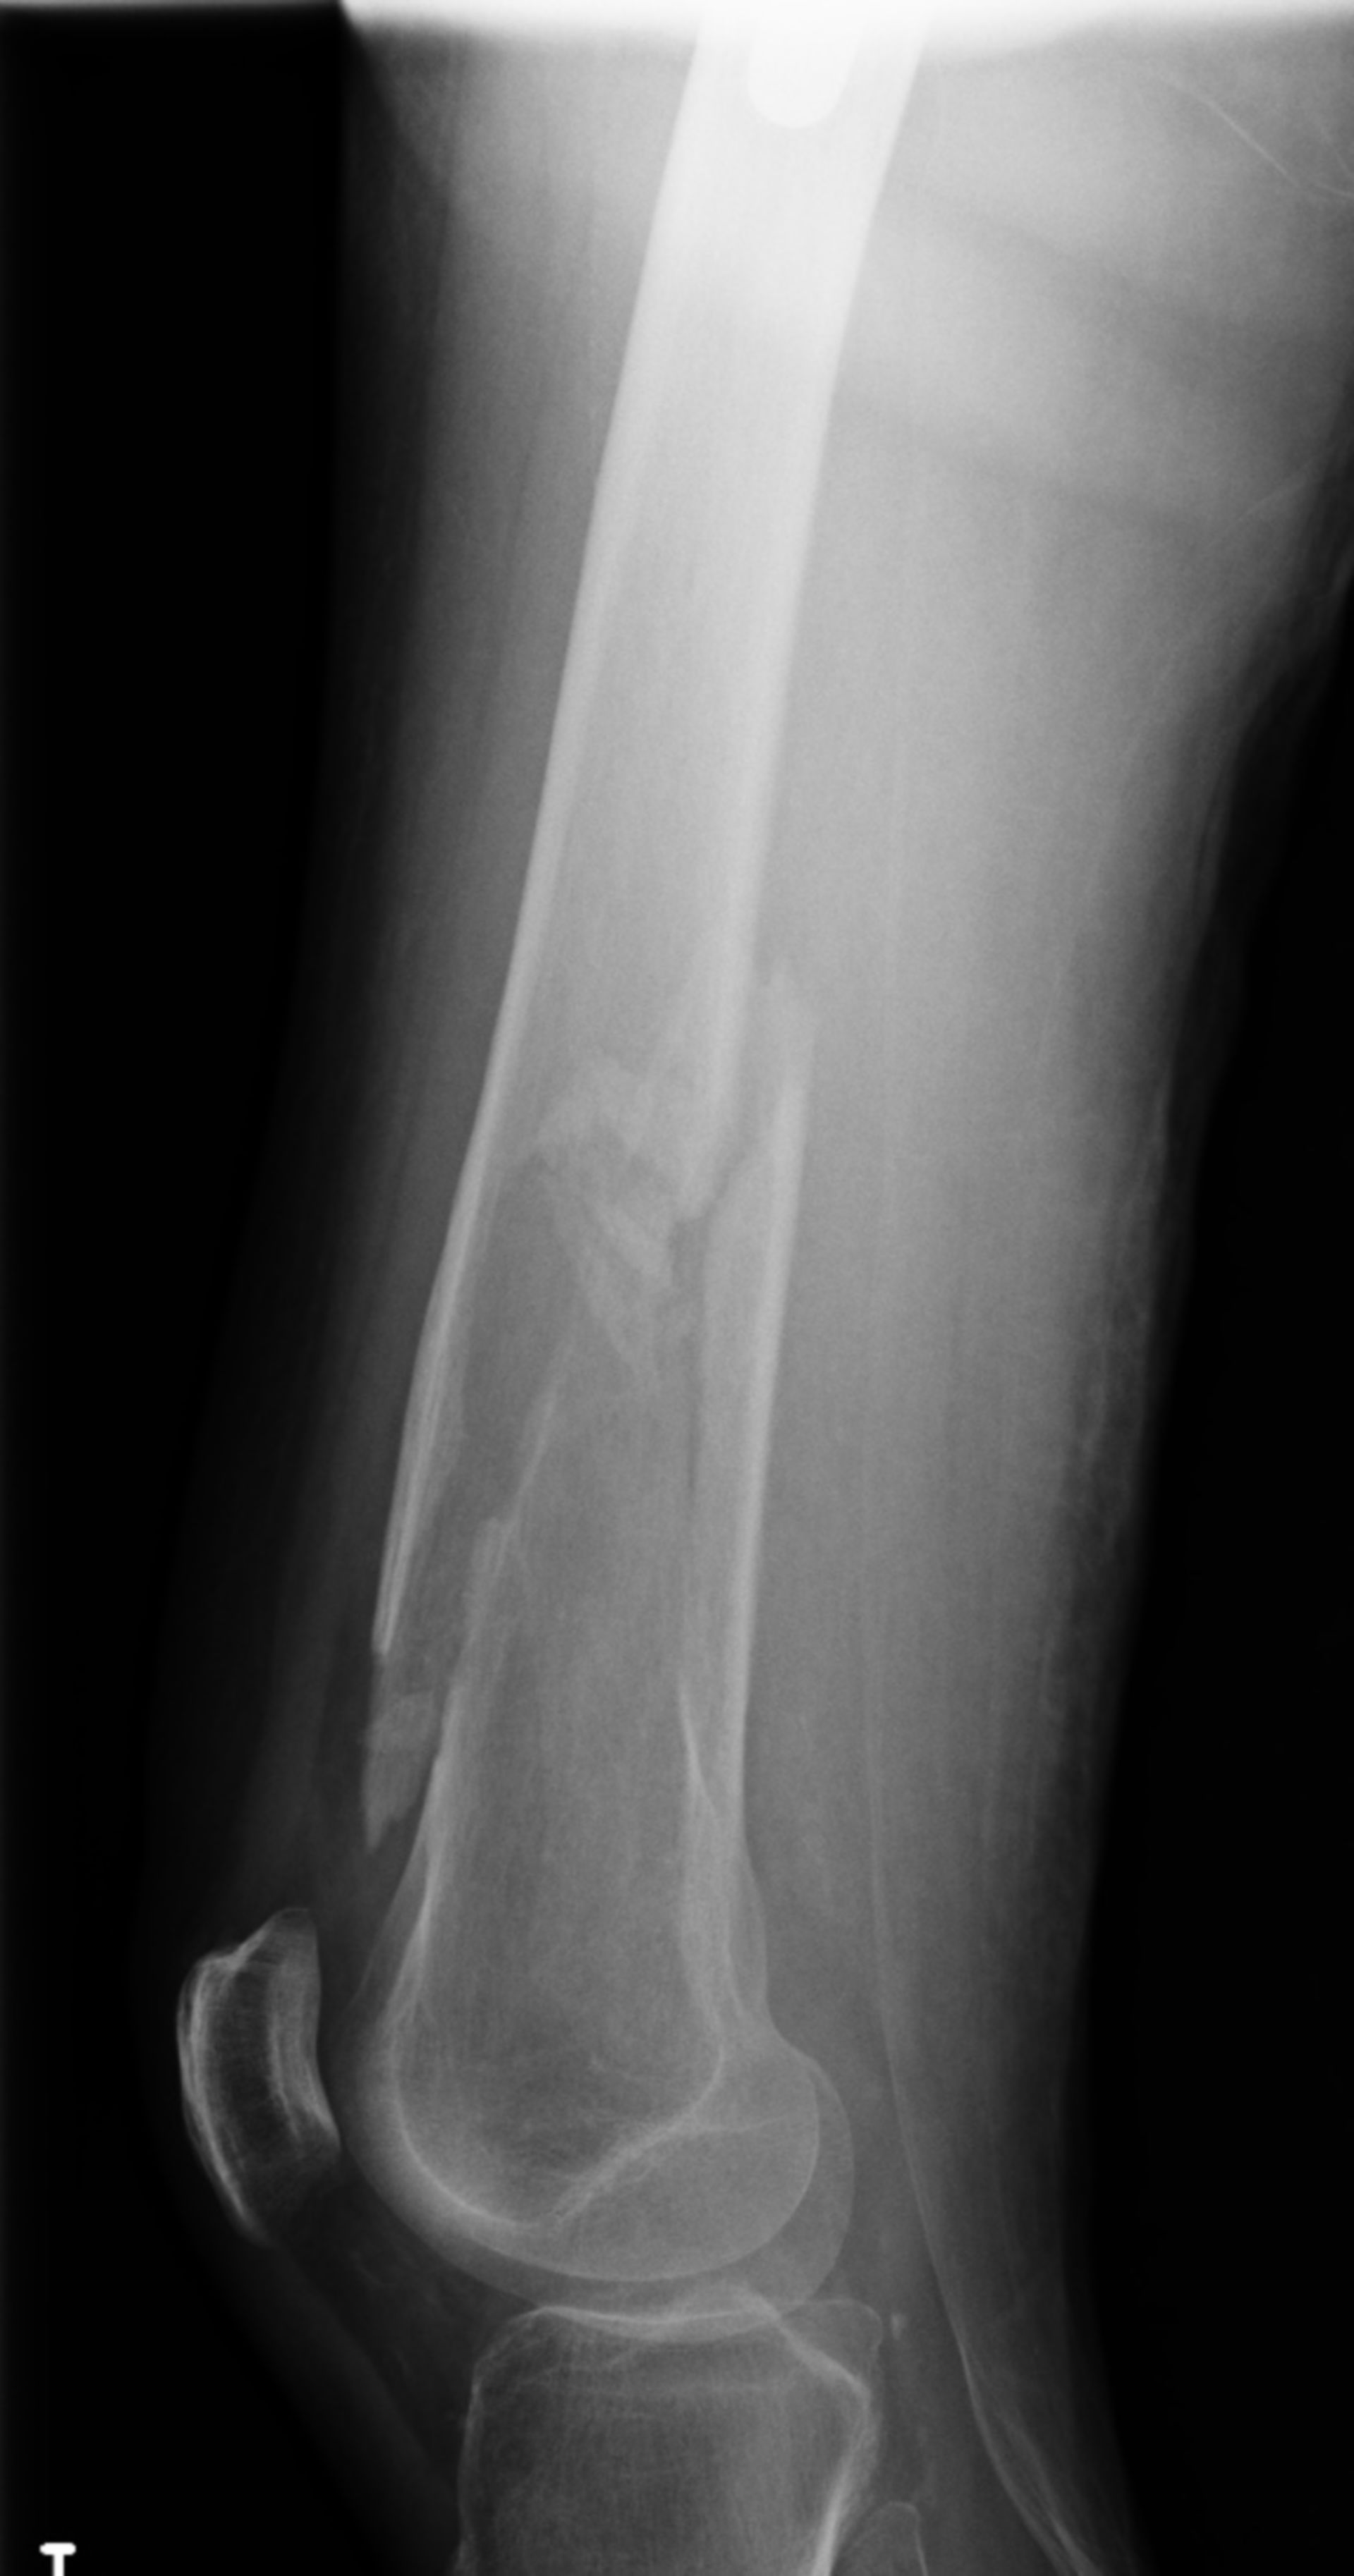 Distal femoral fracture